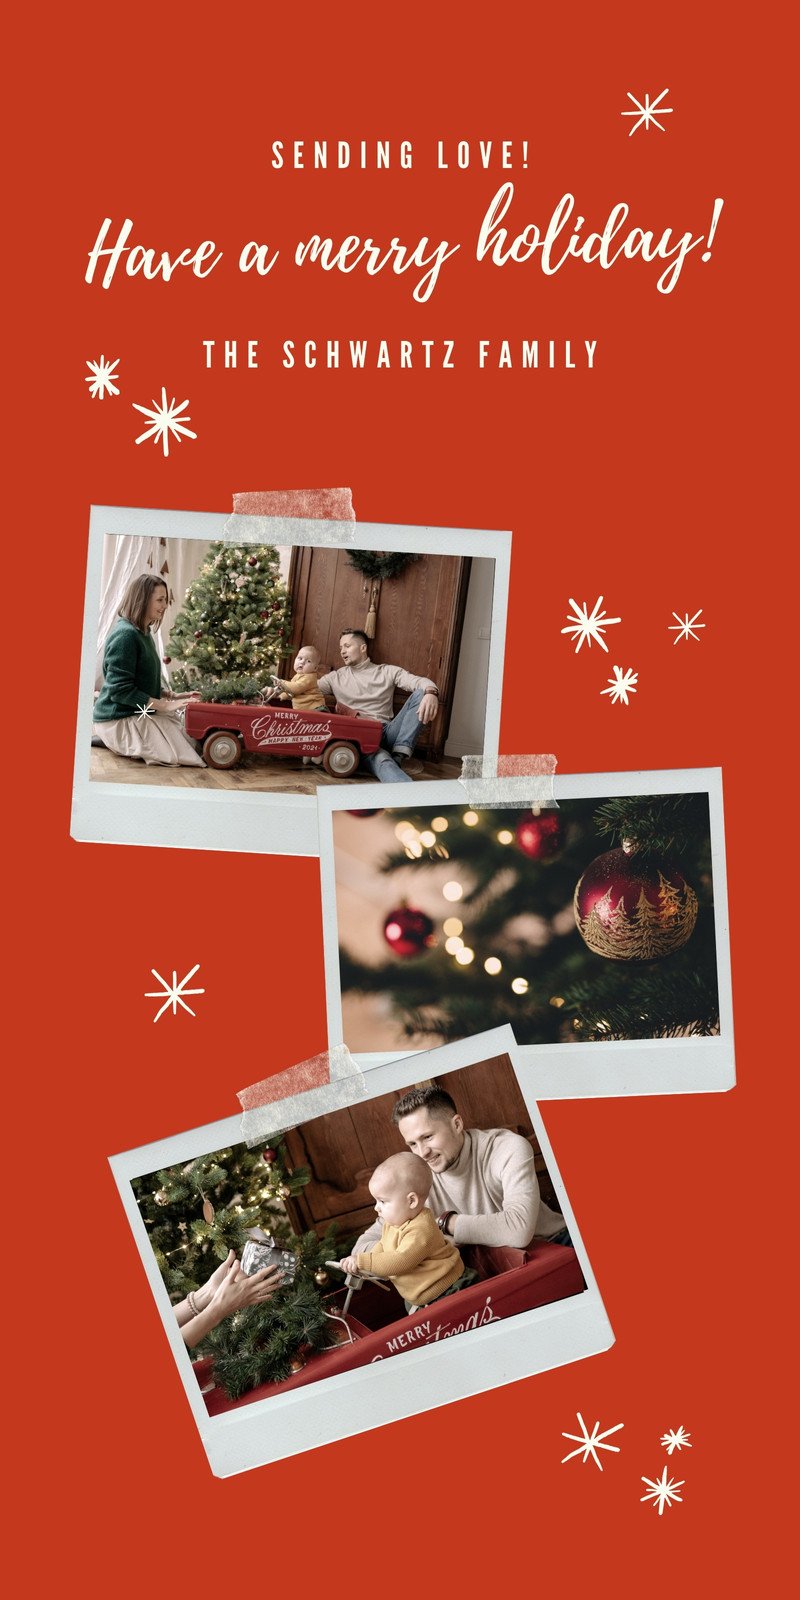 Holiday Photo Card in Red White Festive Style